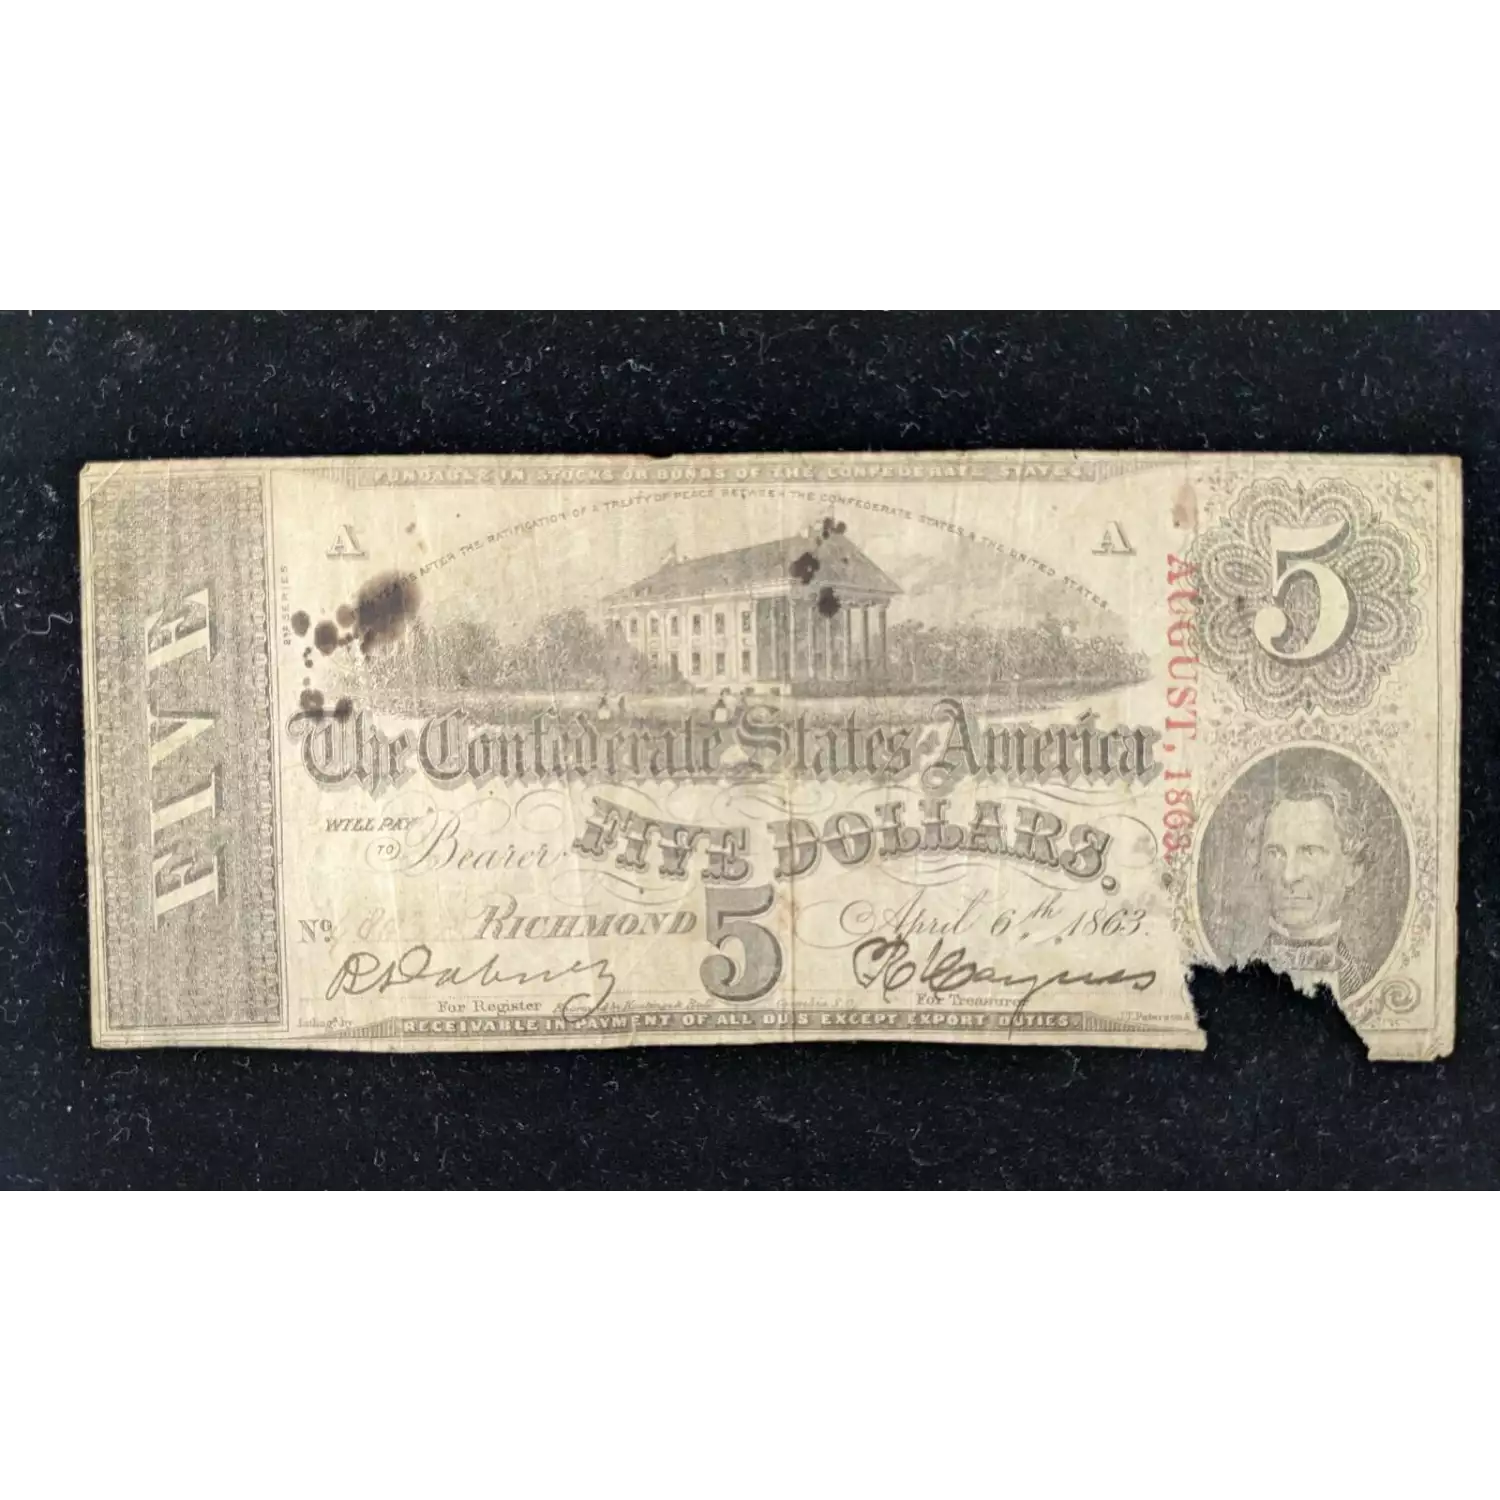 $5   Issues of the Confederate States of America CS-60